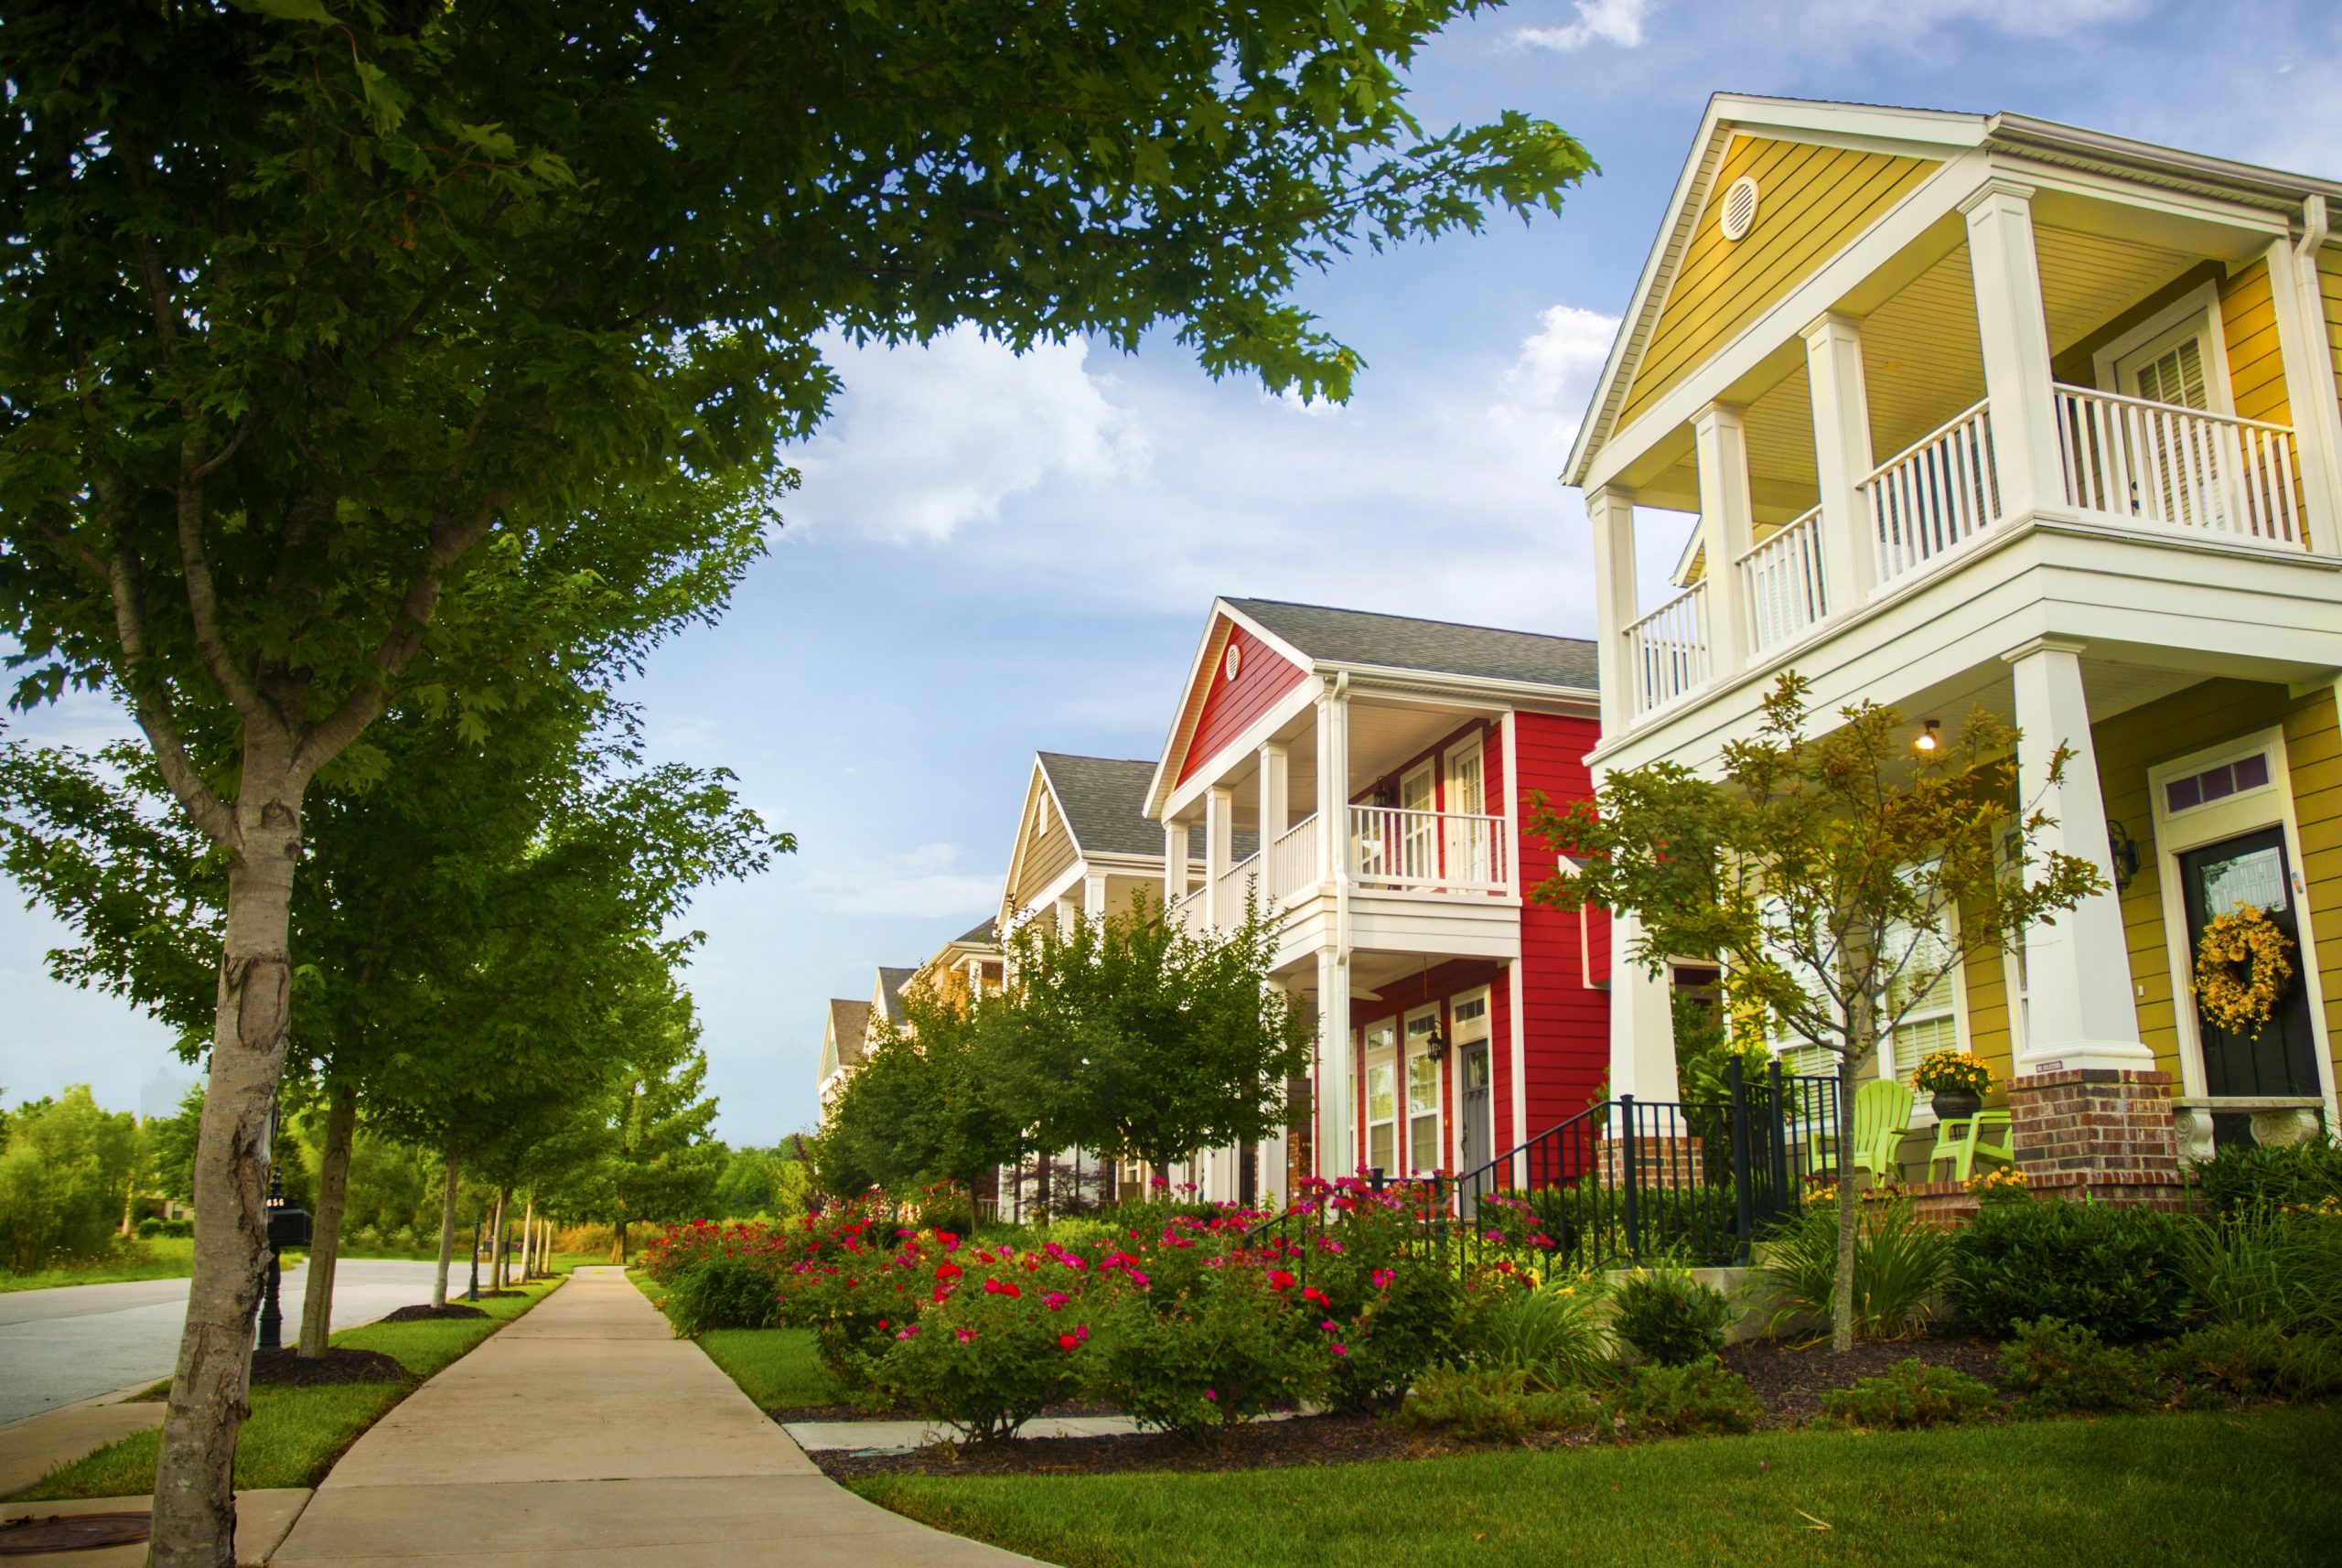 Row of colorful garden homes with two stories and white pillars in suburban neighborhood of Fayetteville, Arkansas